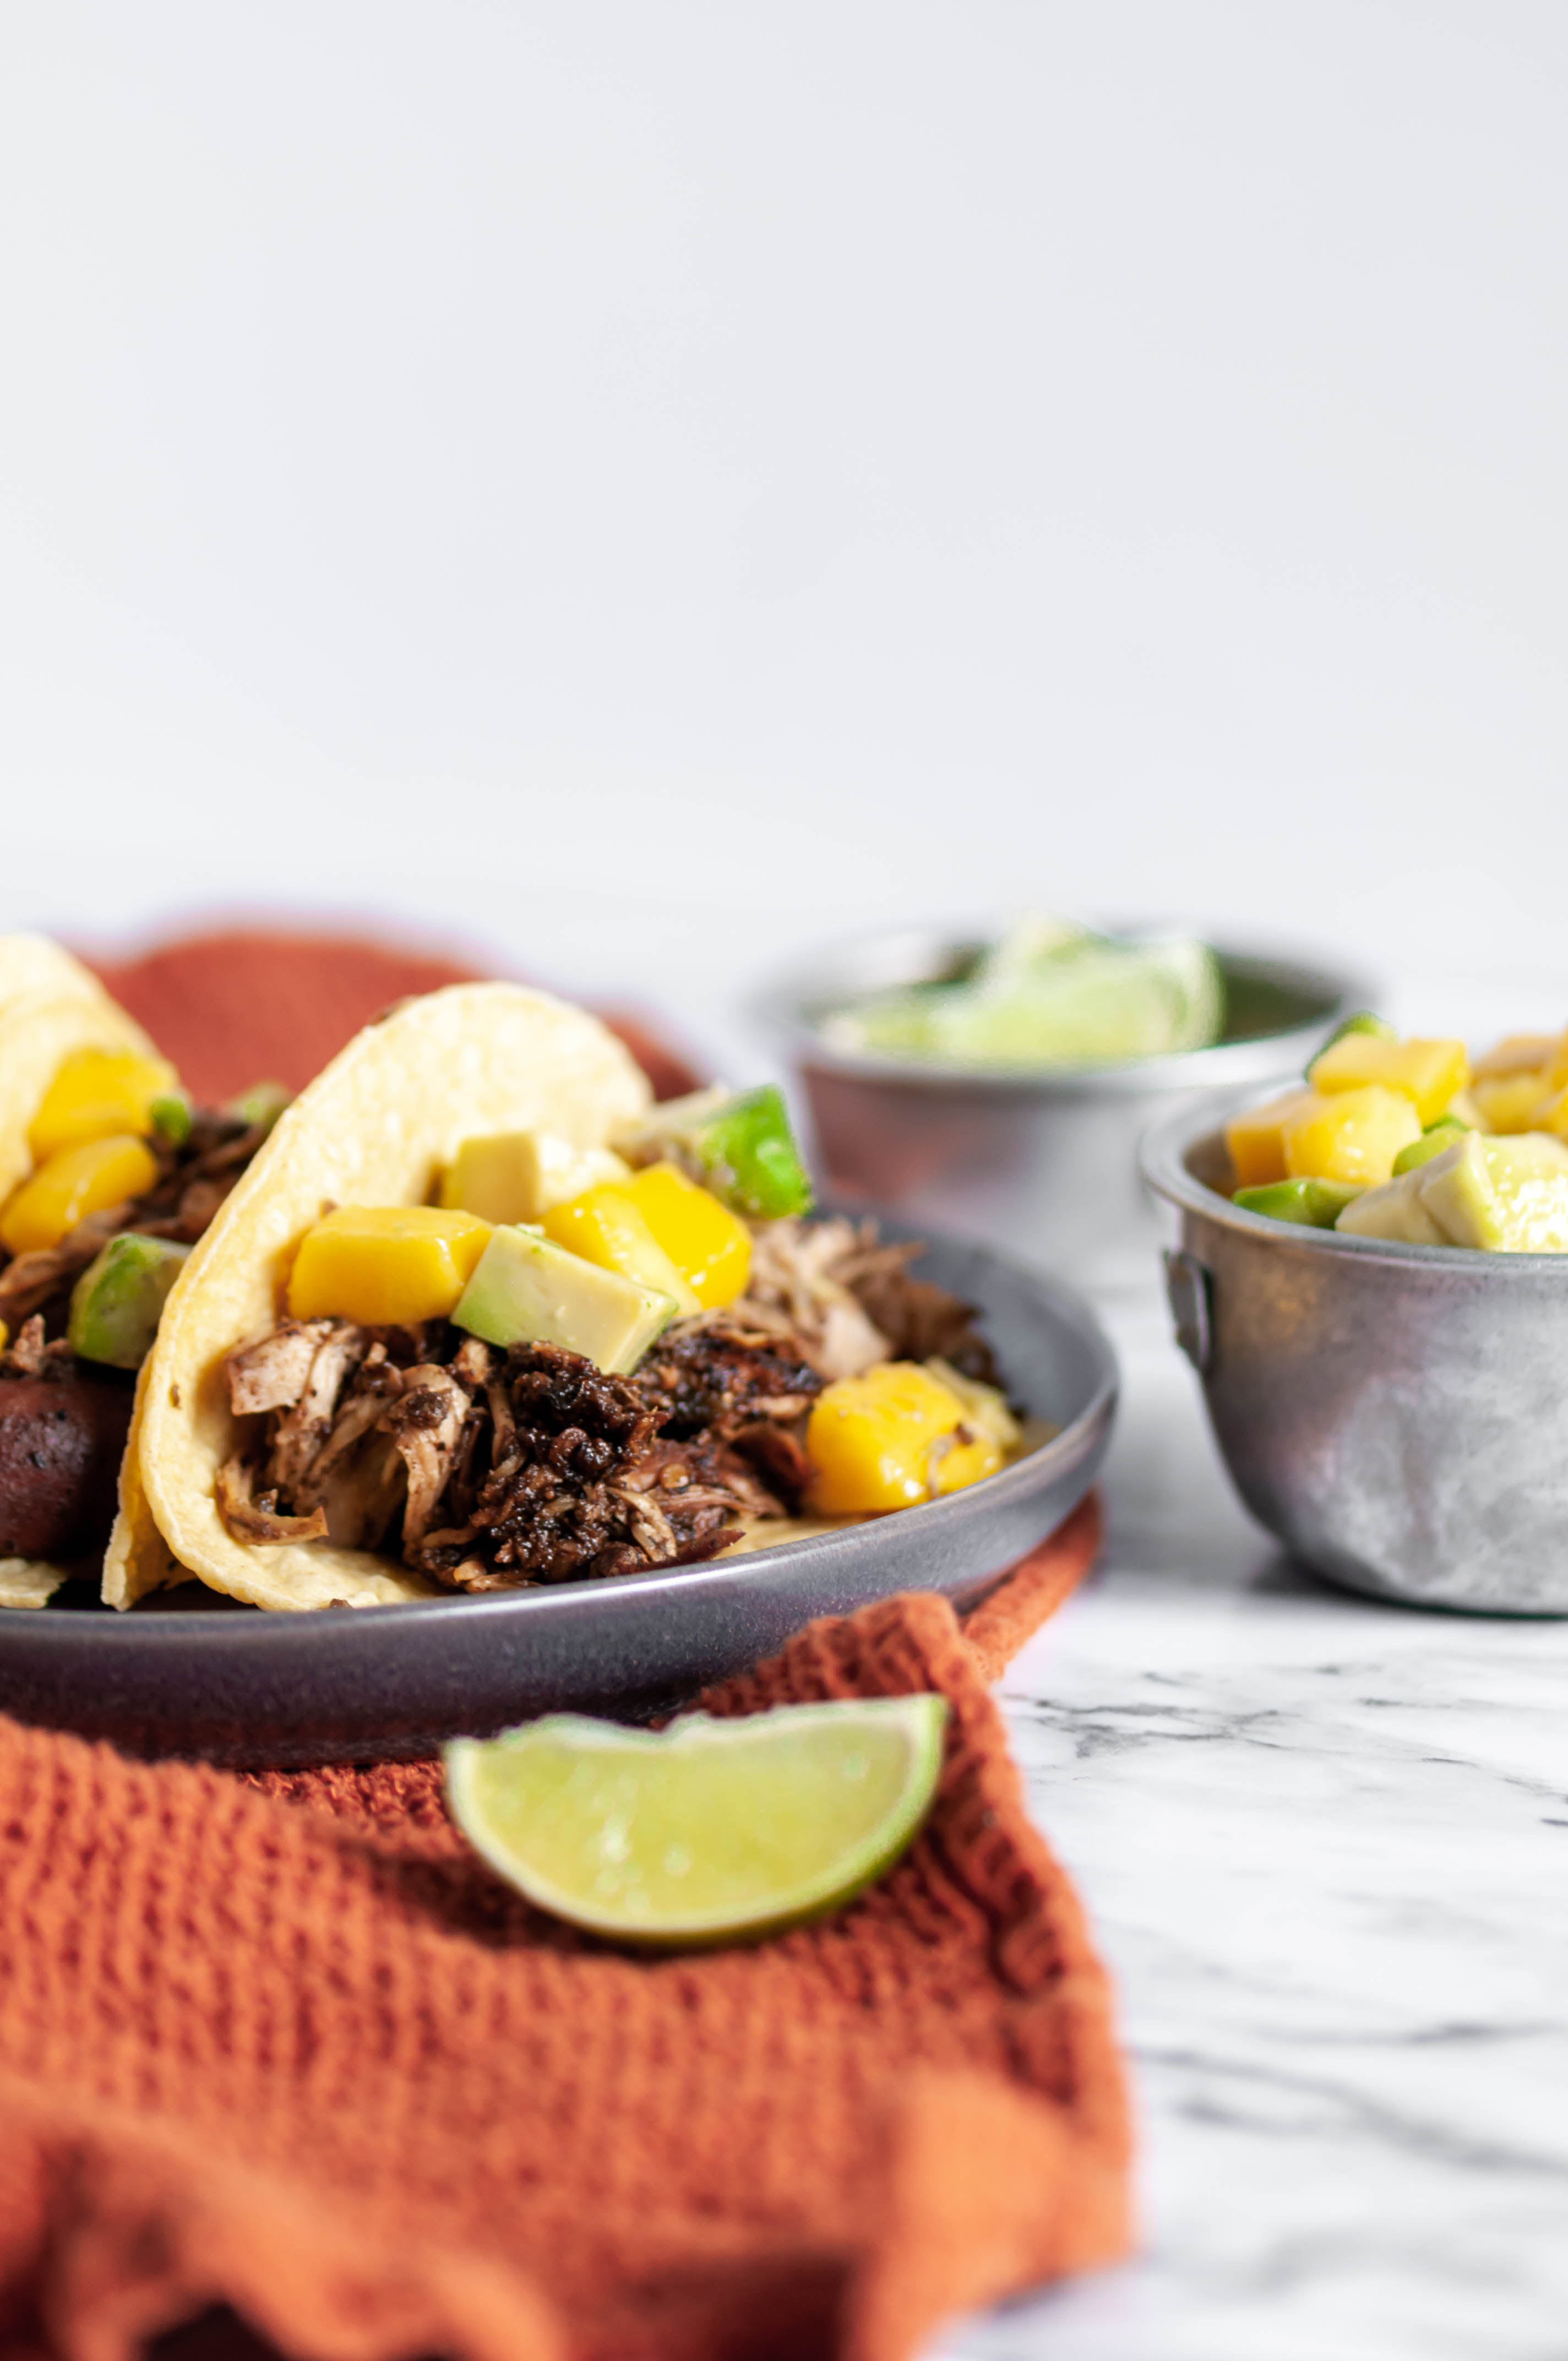 Slow Cooker Jerk Chicken Tacos are super simple and packed full of Caribbean flavor. Mango avocado salsa add some sweet freshness.